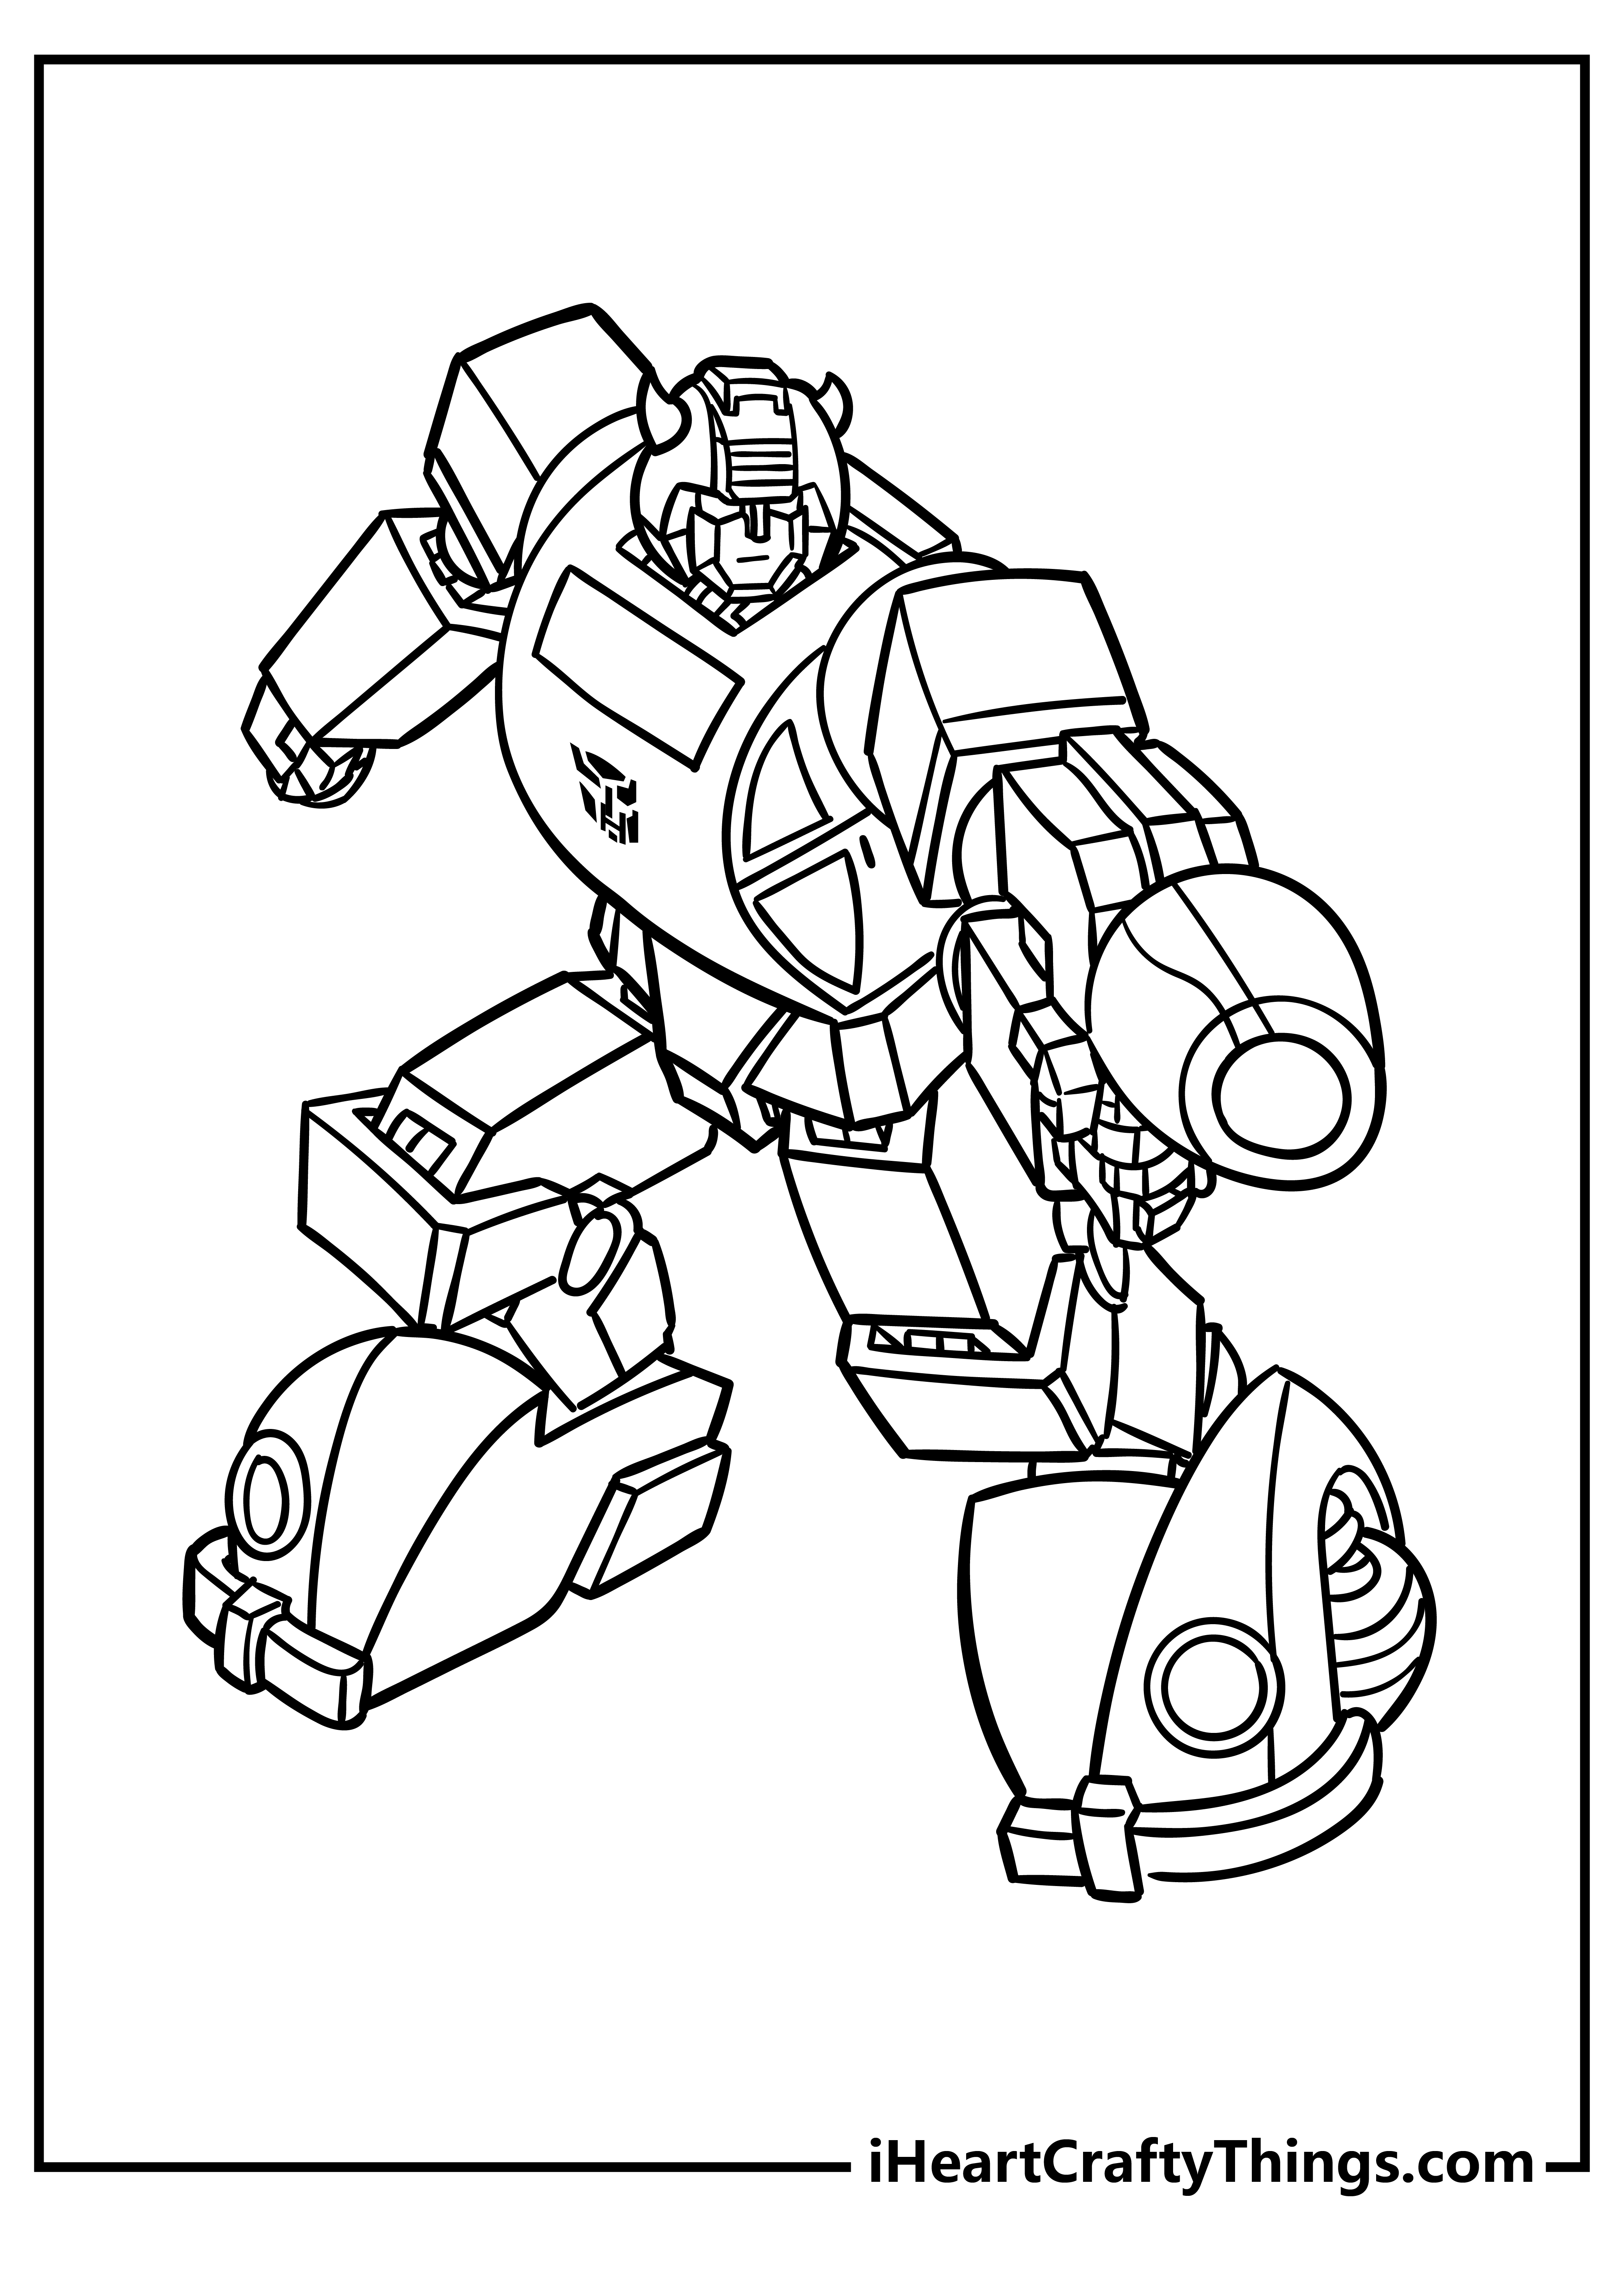 Printable Bumblebee Coloring Pages Updated 20